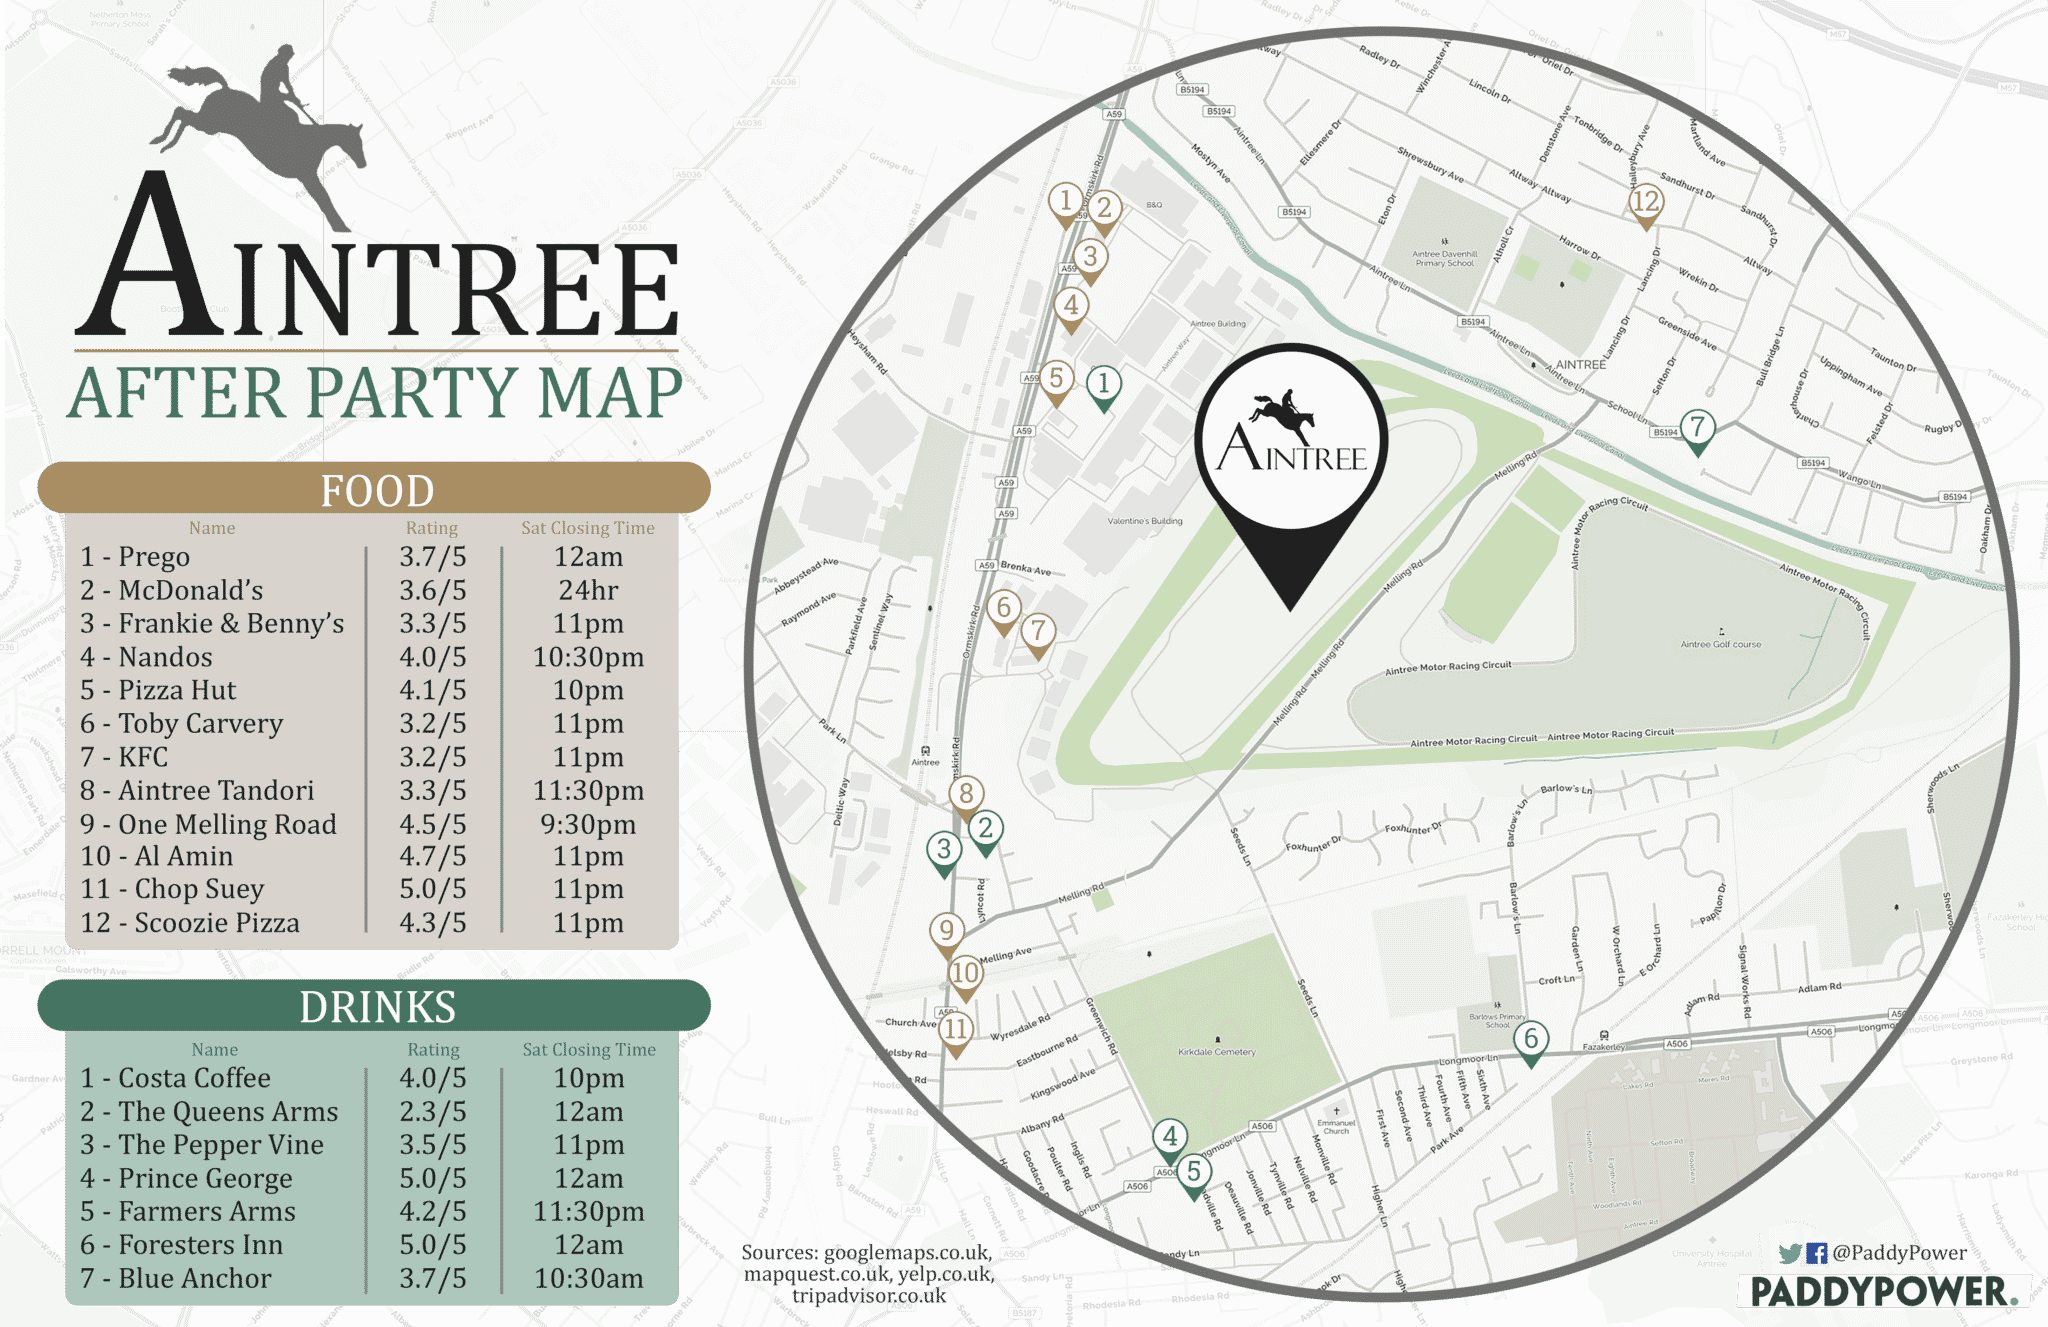 Aintree After Party Map